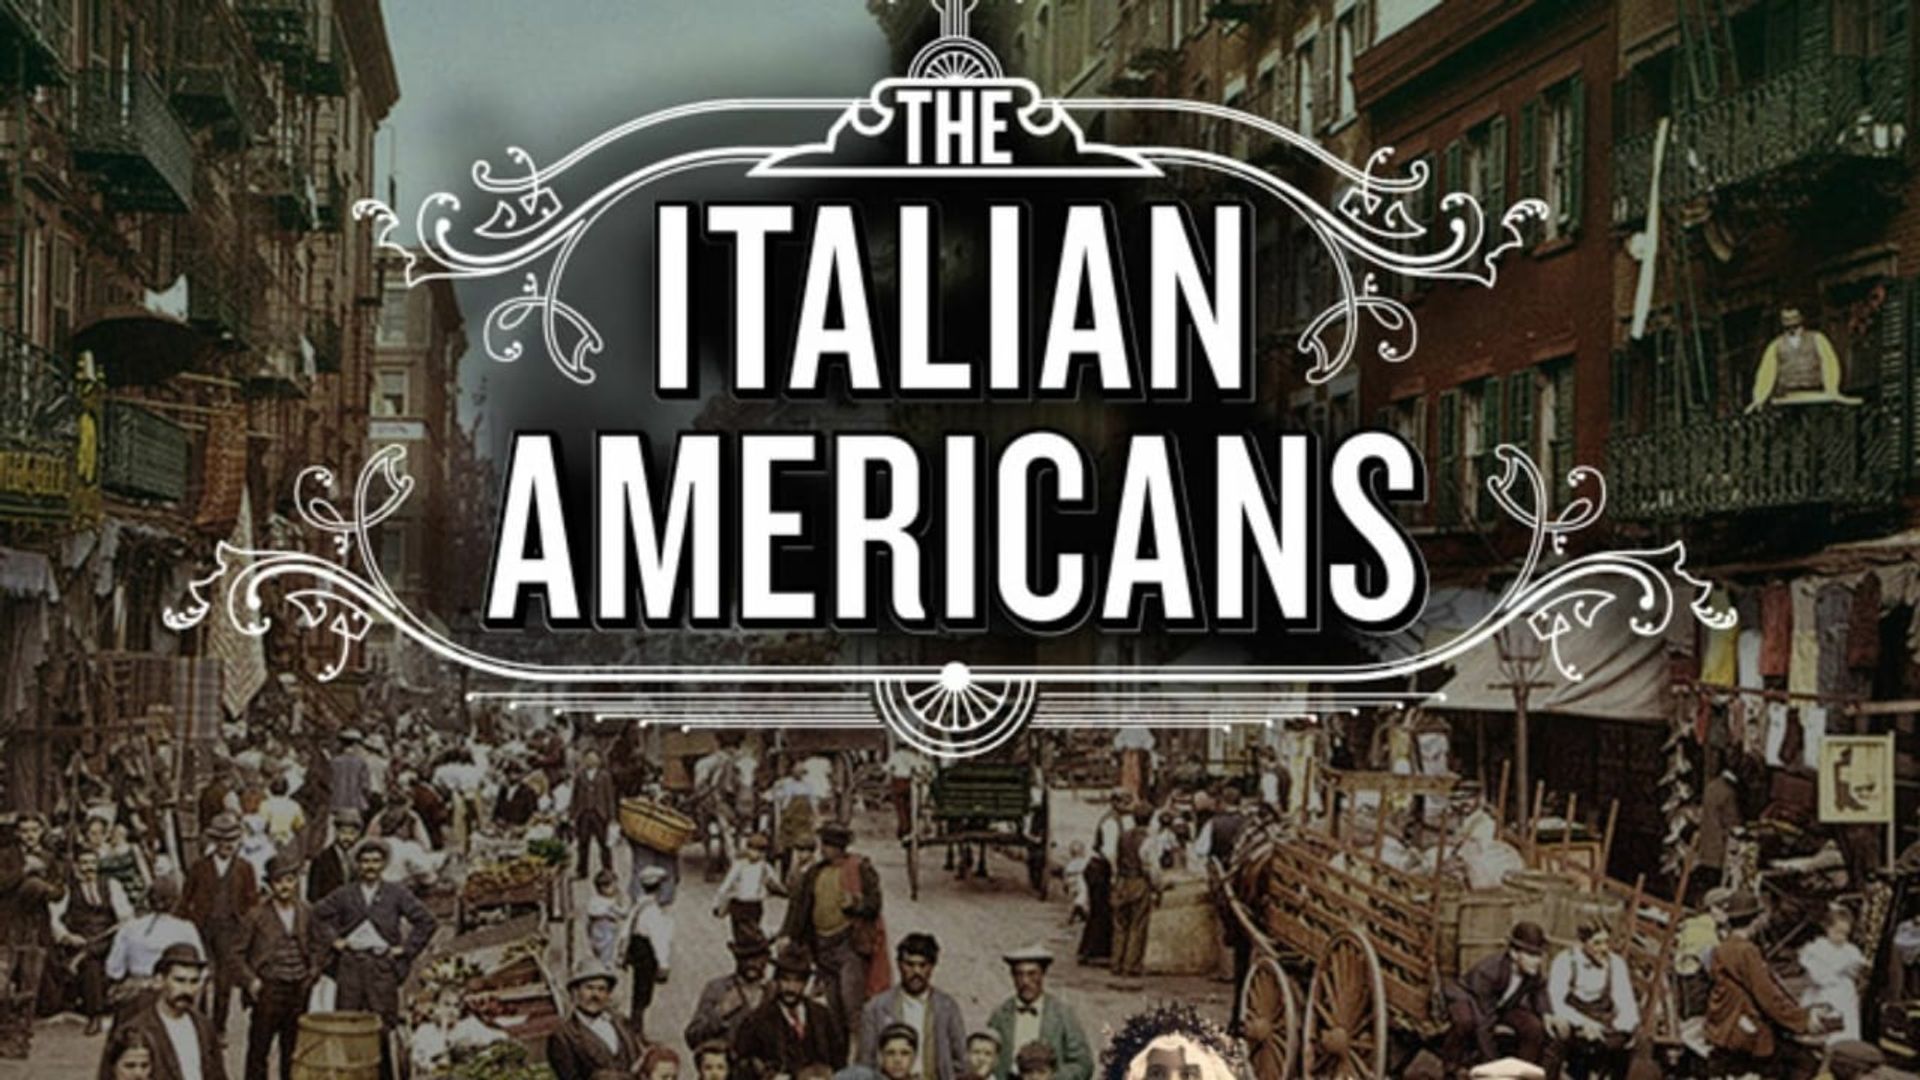 The Italian Americans background